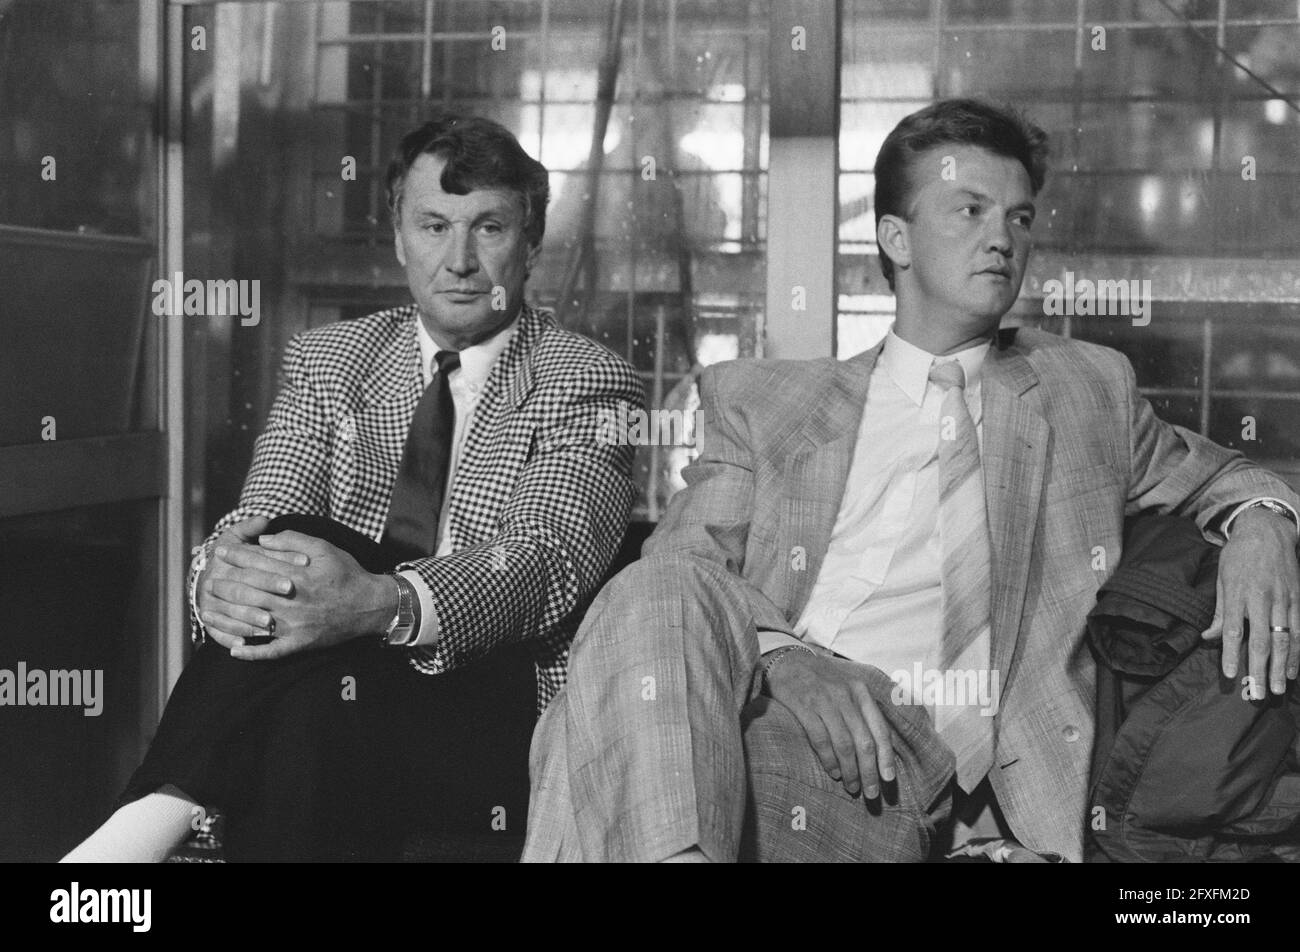 UEFA Cup Ajax v Sporting Lisbon 1-2; Ajax coach Spitz Kohn and Louis van Gaal, October 5, 1988, sports, soccer, The Netherlands, 20th century press agency photo, news to remember, documentary, historic photography 1945-1990, visual stories, human history of the Twentieth Century, capturing moments in time Stock Photo